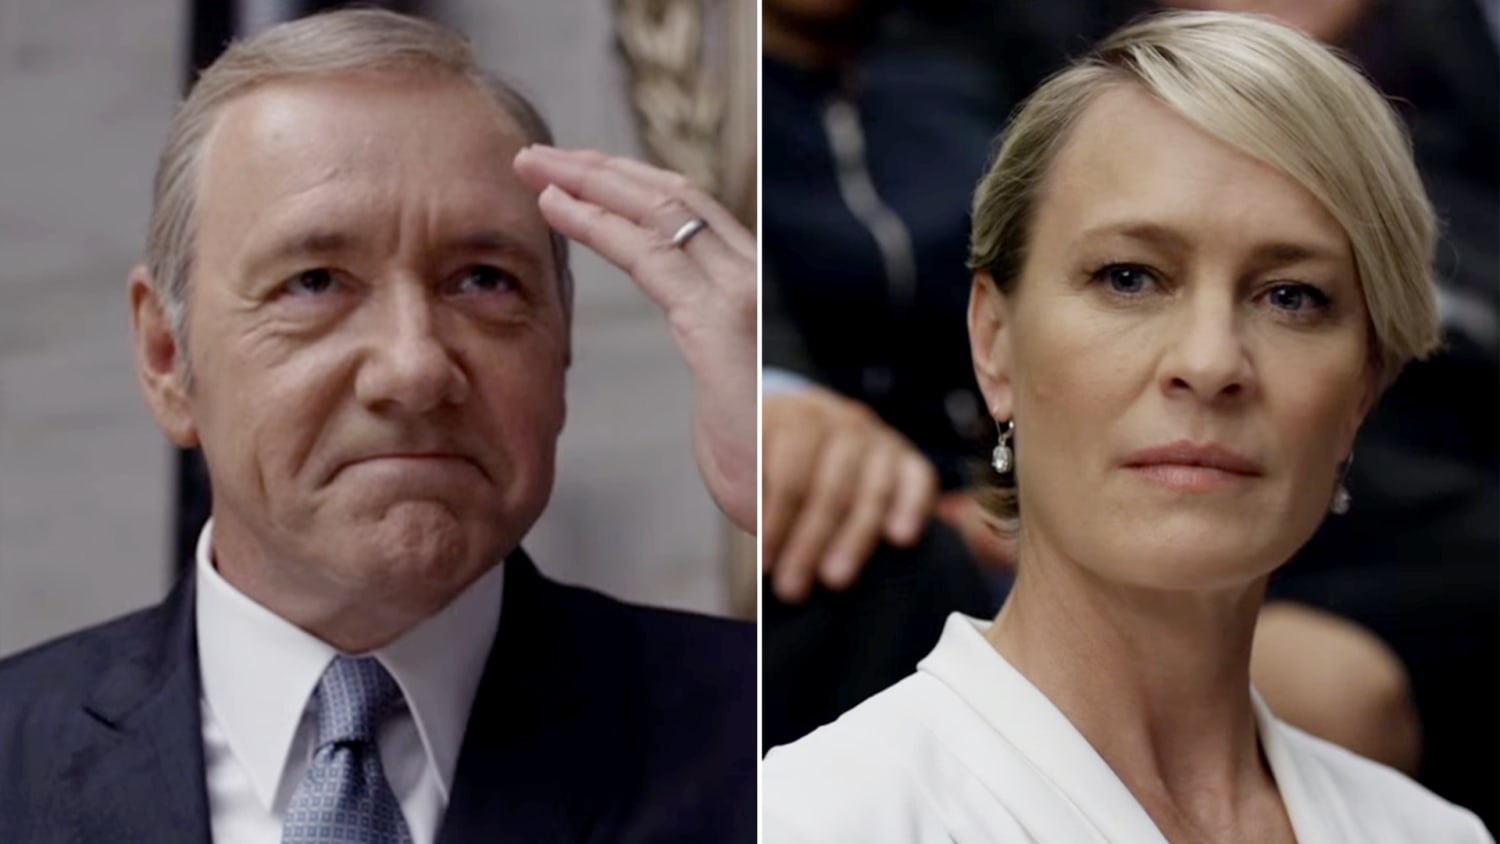 'House of Cards' Season 4 trailer: Frank and Claire Underwood are at war - TODAY.com1920 x 1080